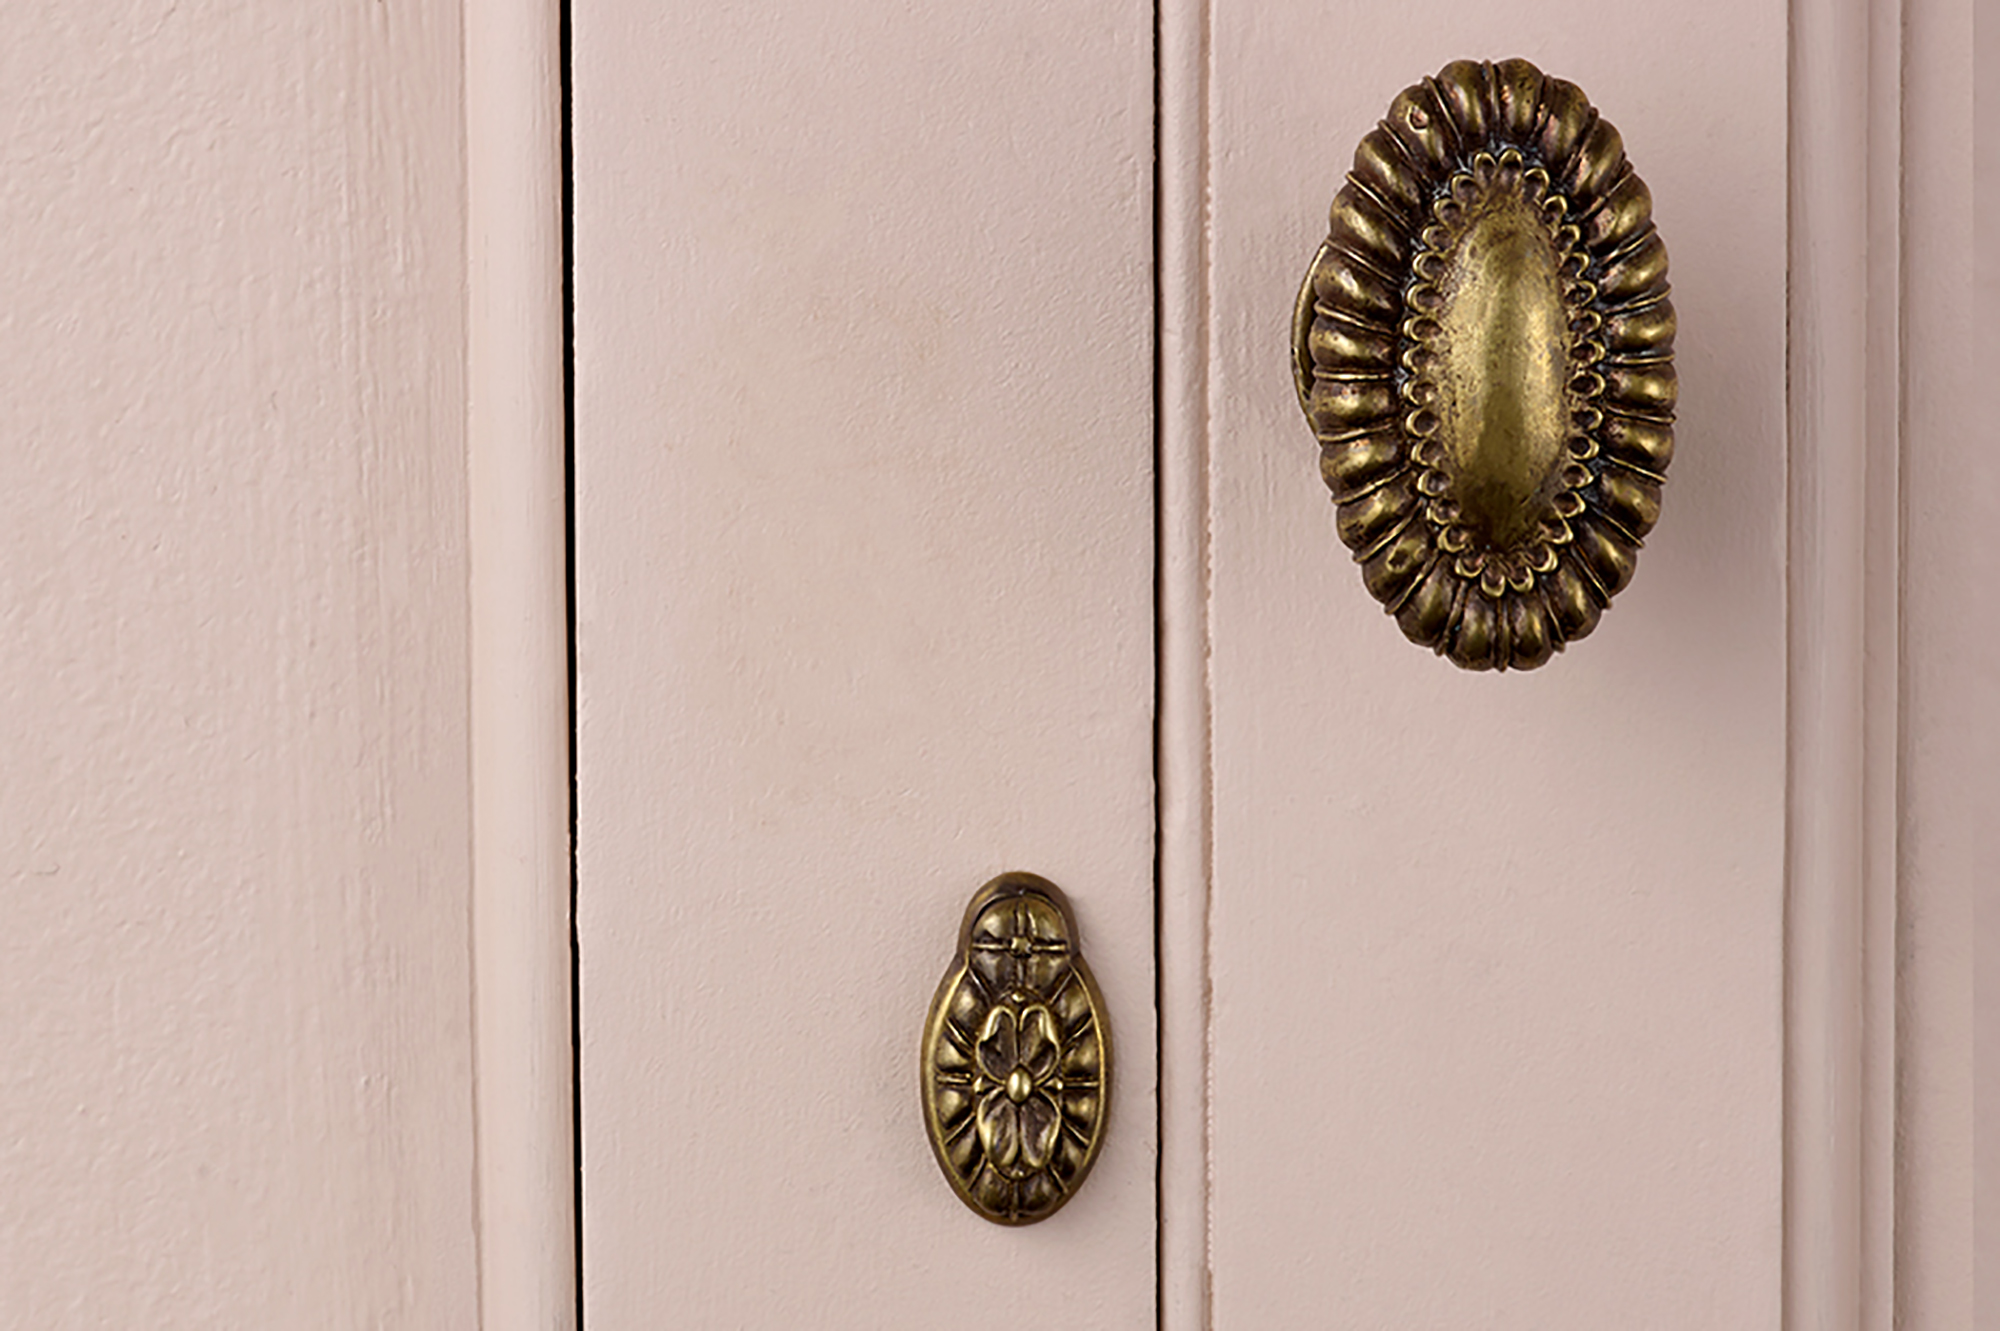 The Holland door knob and escutcheon by Collier Webb and Edward Bulmer